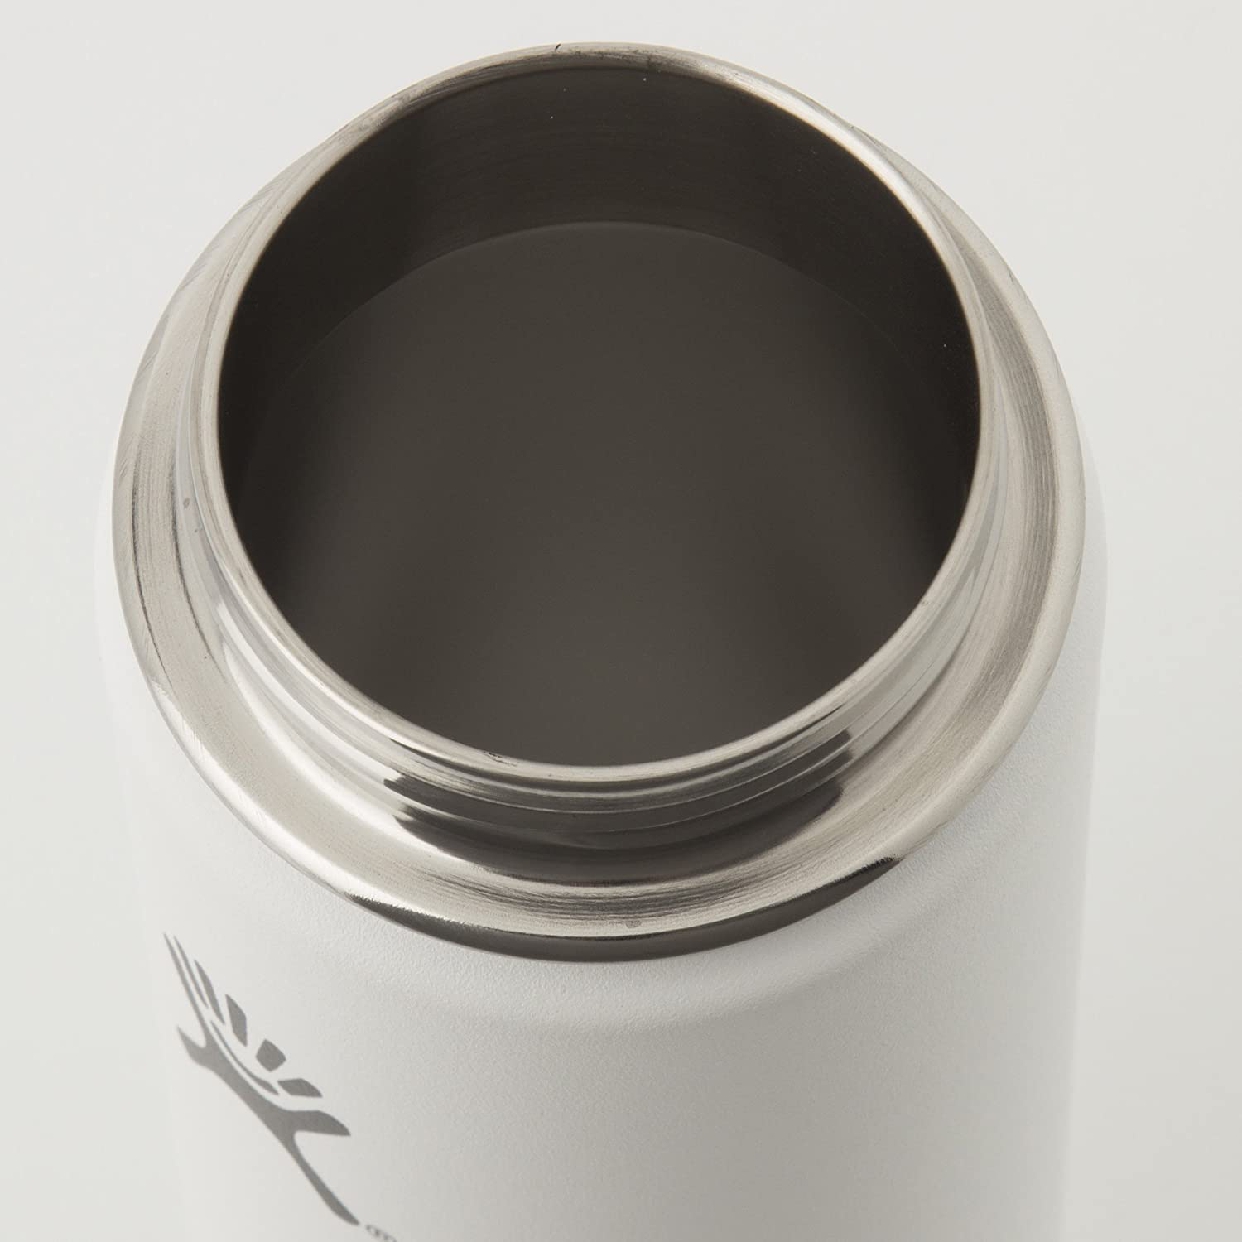 Hydro Flask(ハイドロフラスク) 18 oz Wide Mouth Whiteの商品画像サムネ5 